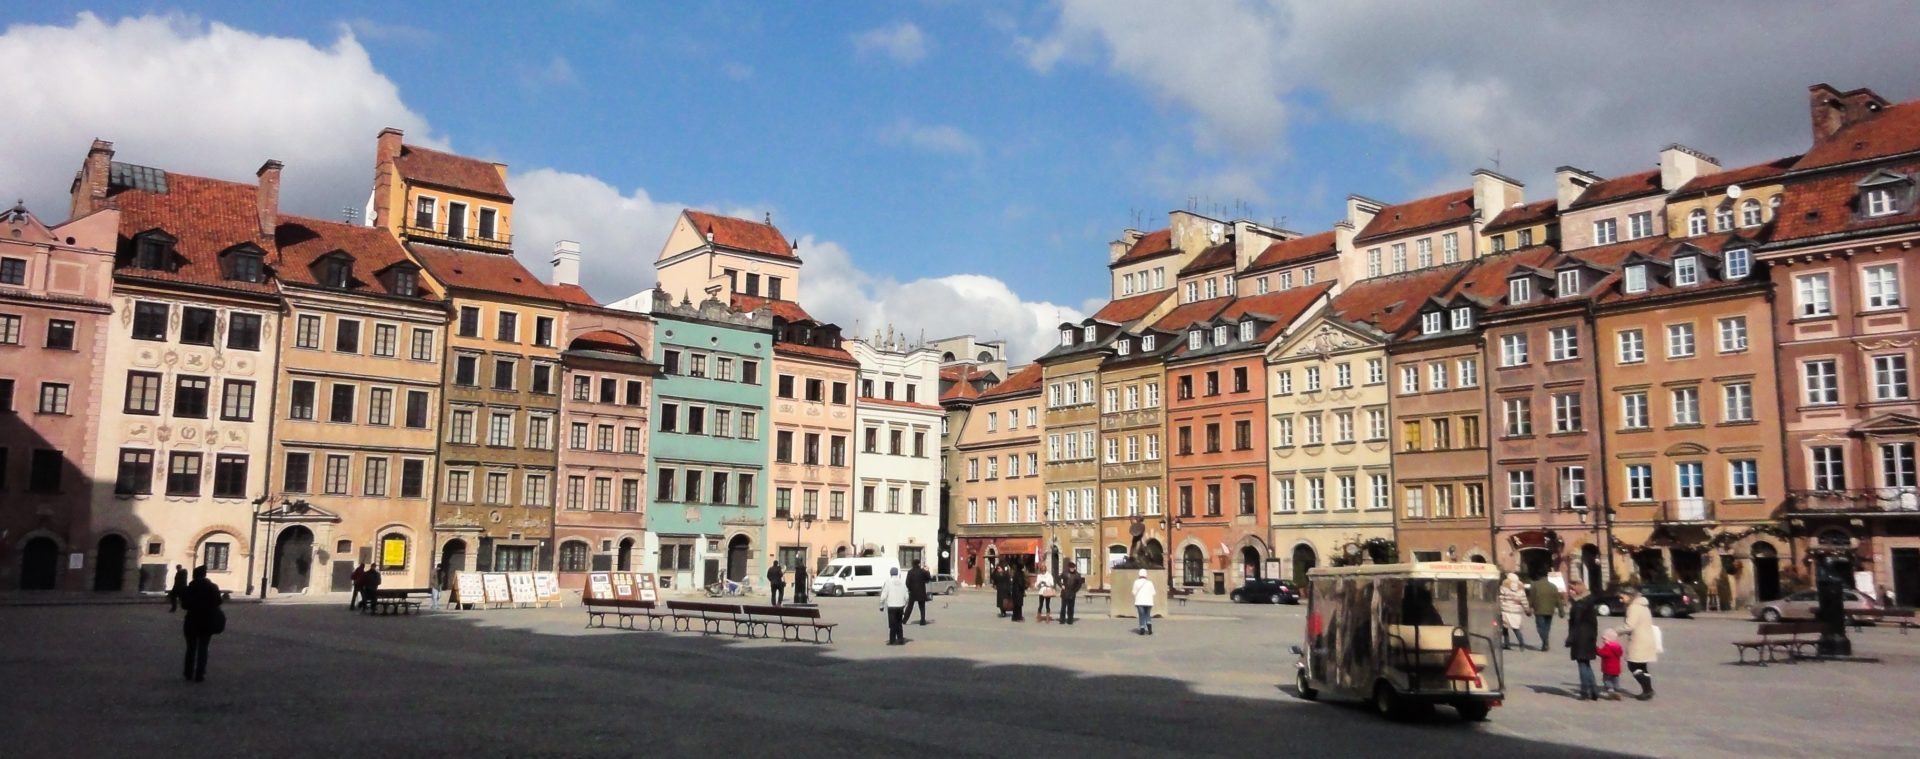 Sunday City Guide: What to Do in Warsaw, Poland